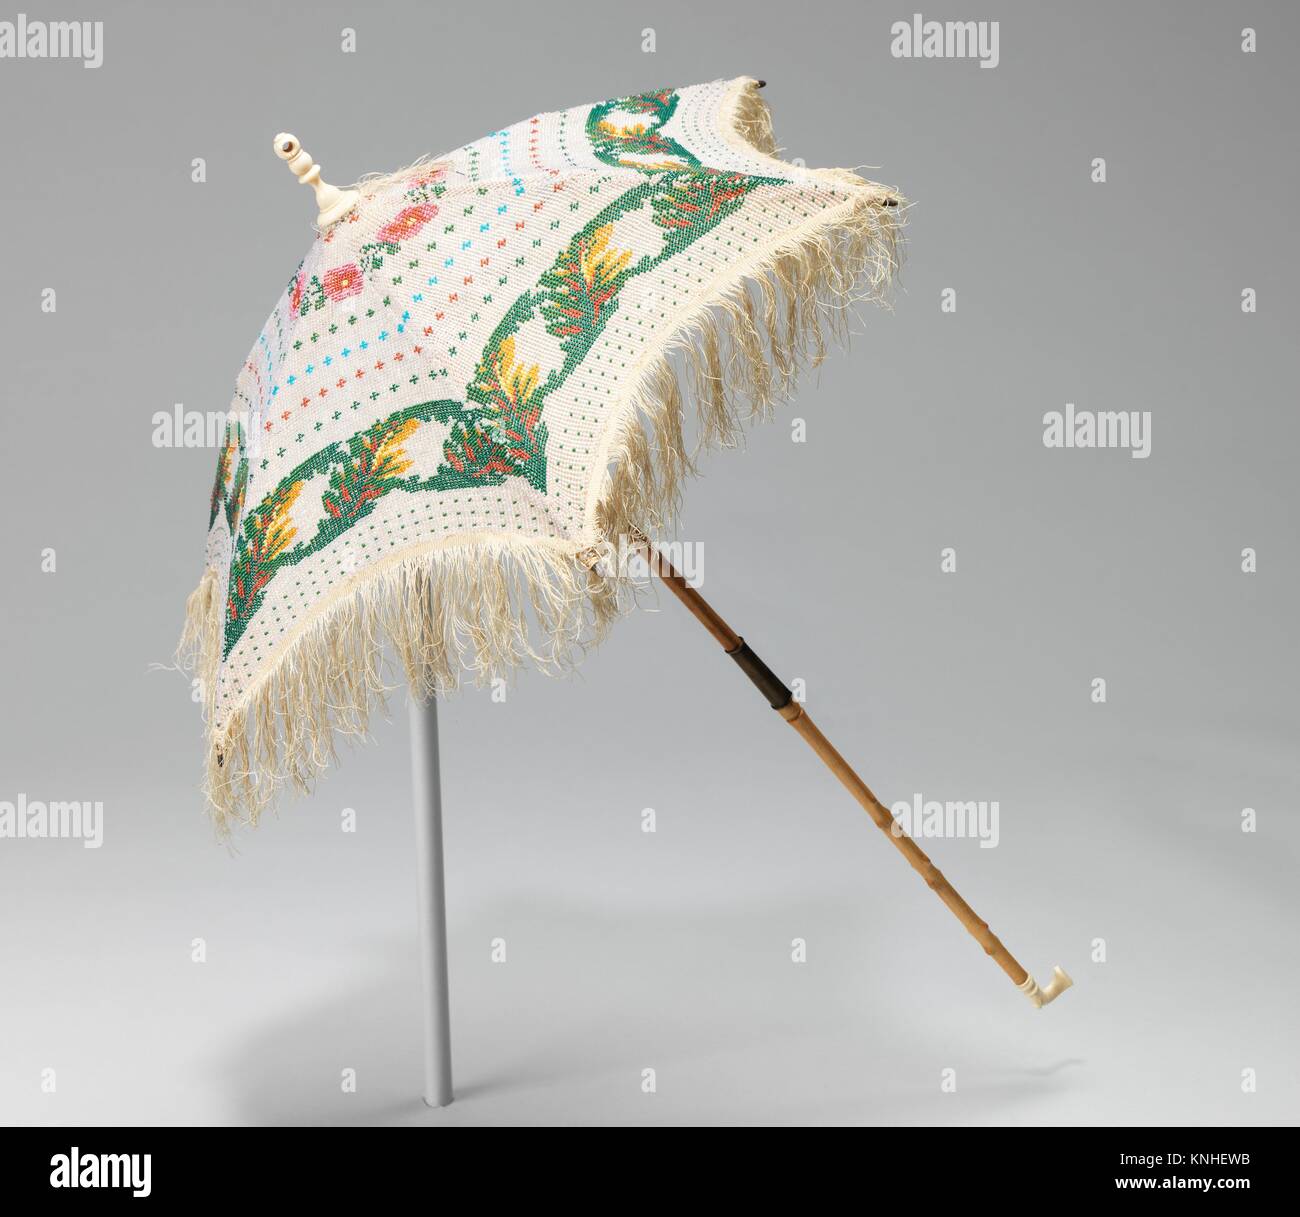 Page 2 - 1800s Fashion High Resolution Stock Photography and Images - Alamy